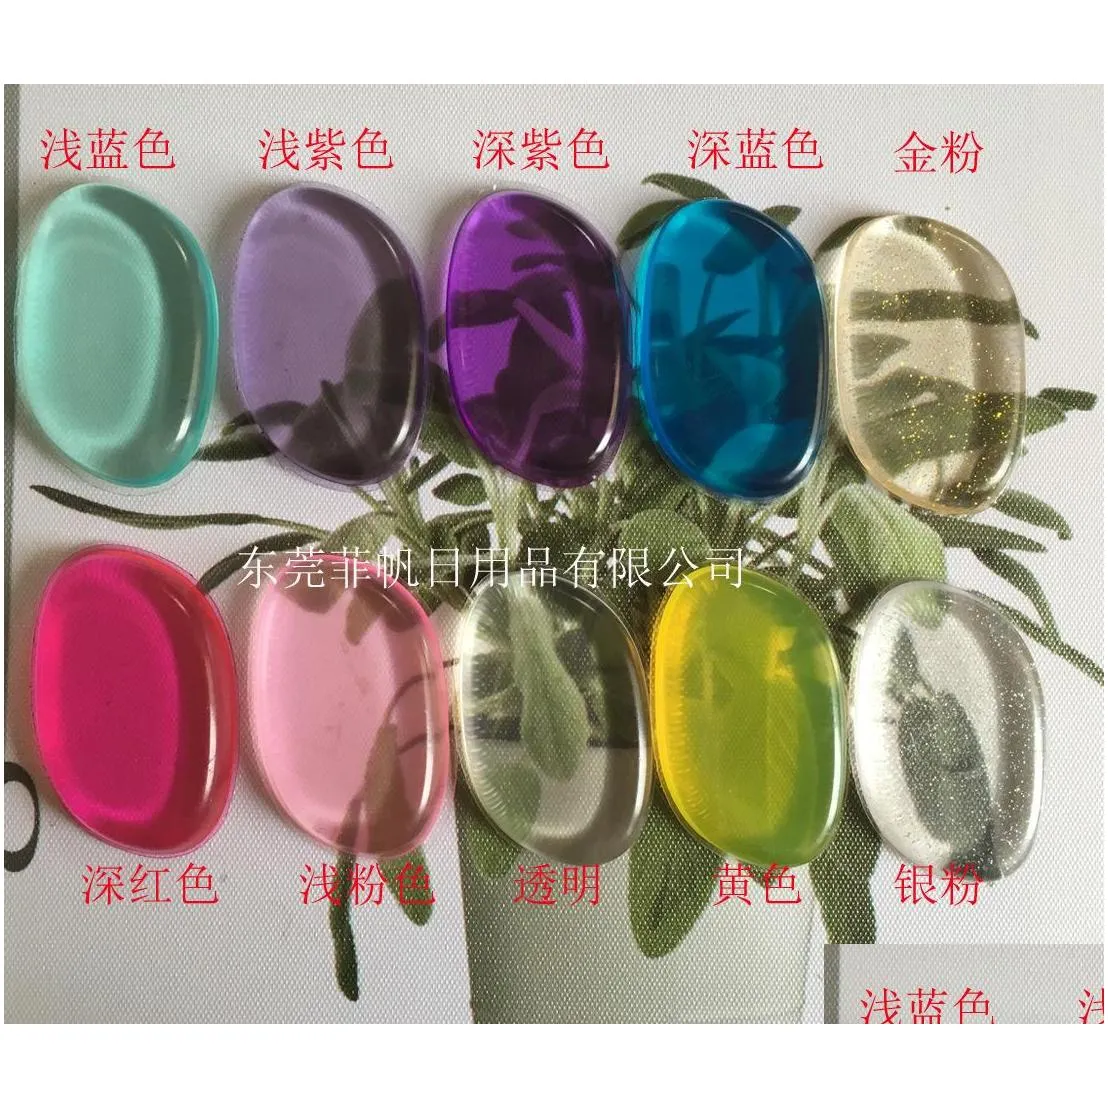 silicone gel cosmetic puff transparent silica flawless powder sponge face blending jelly make up accessories